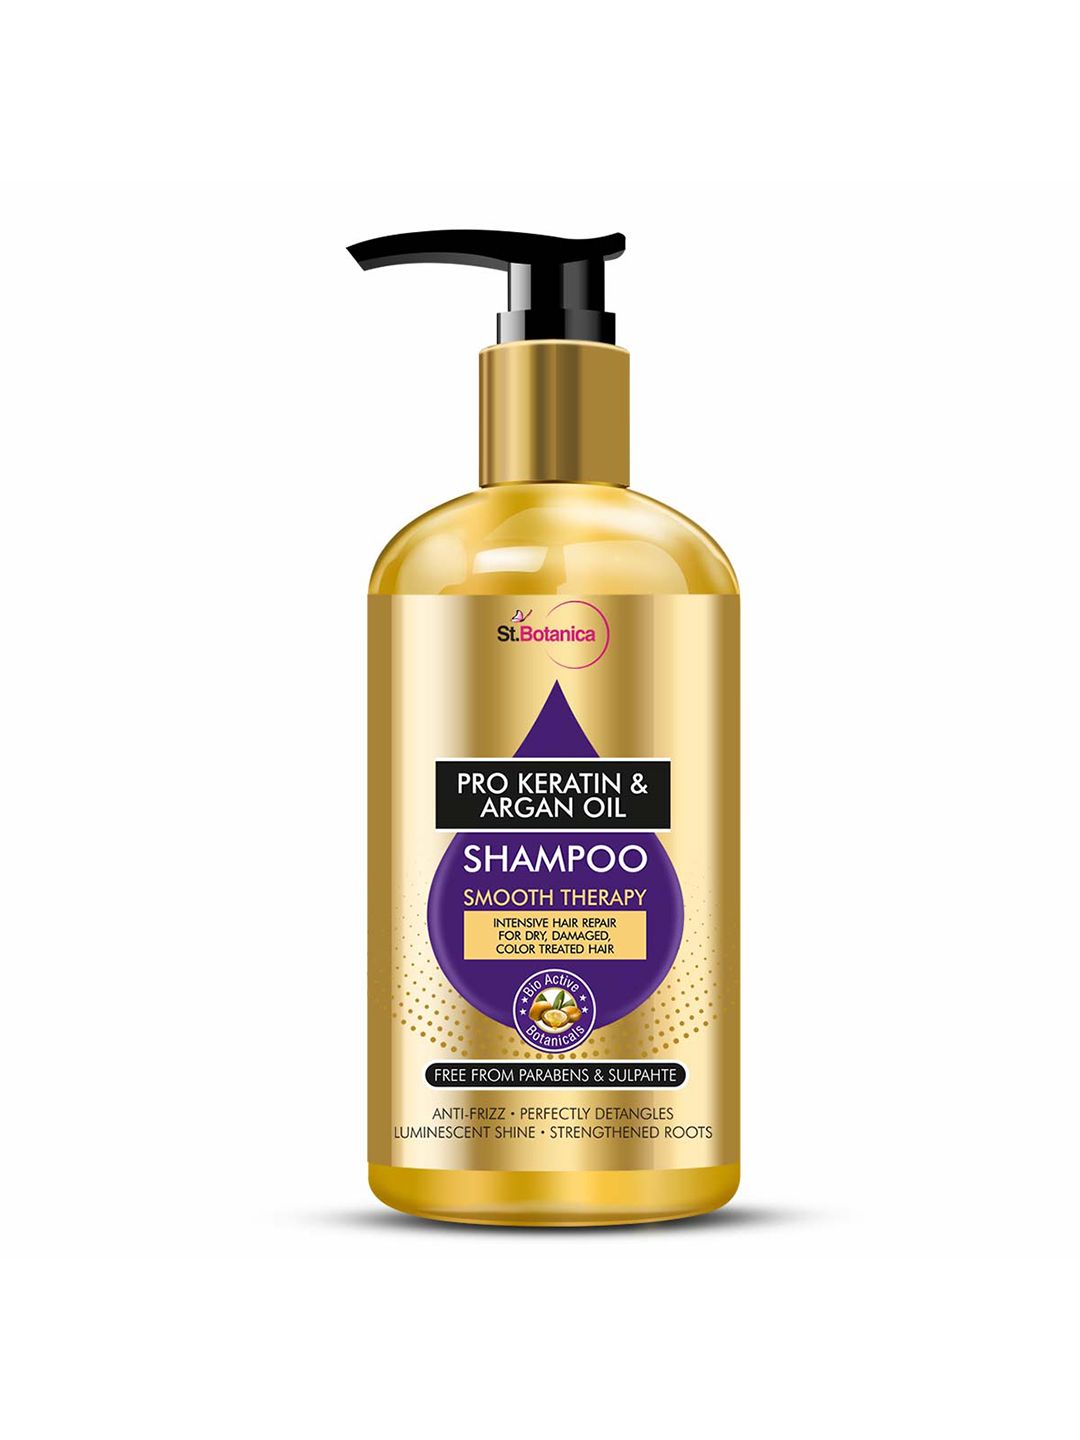 StBotanica Pro Keratin & Argan Oil Smooth Therapy Shampoo 300ml Price in India